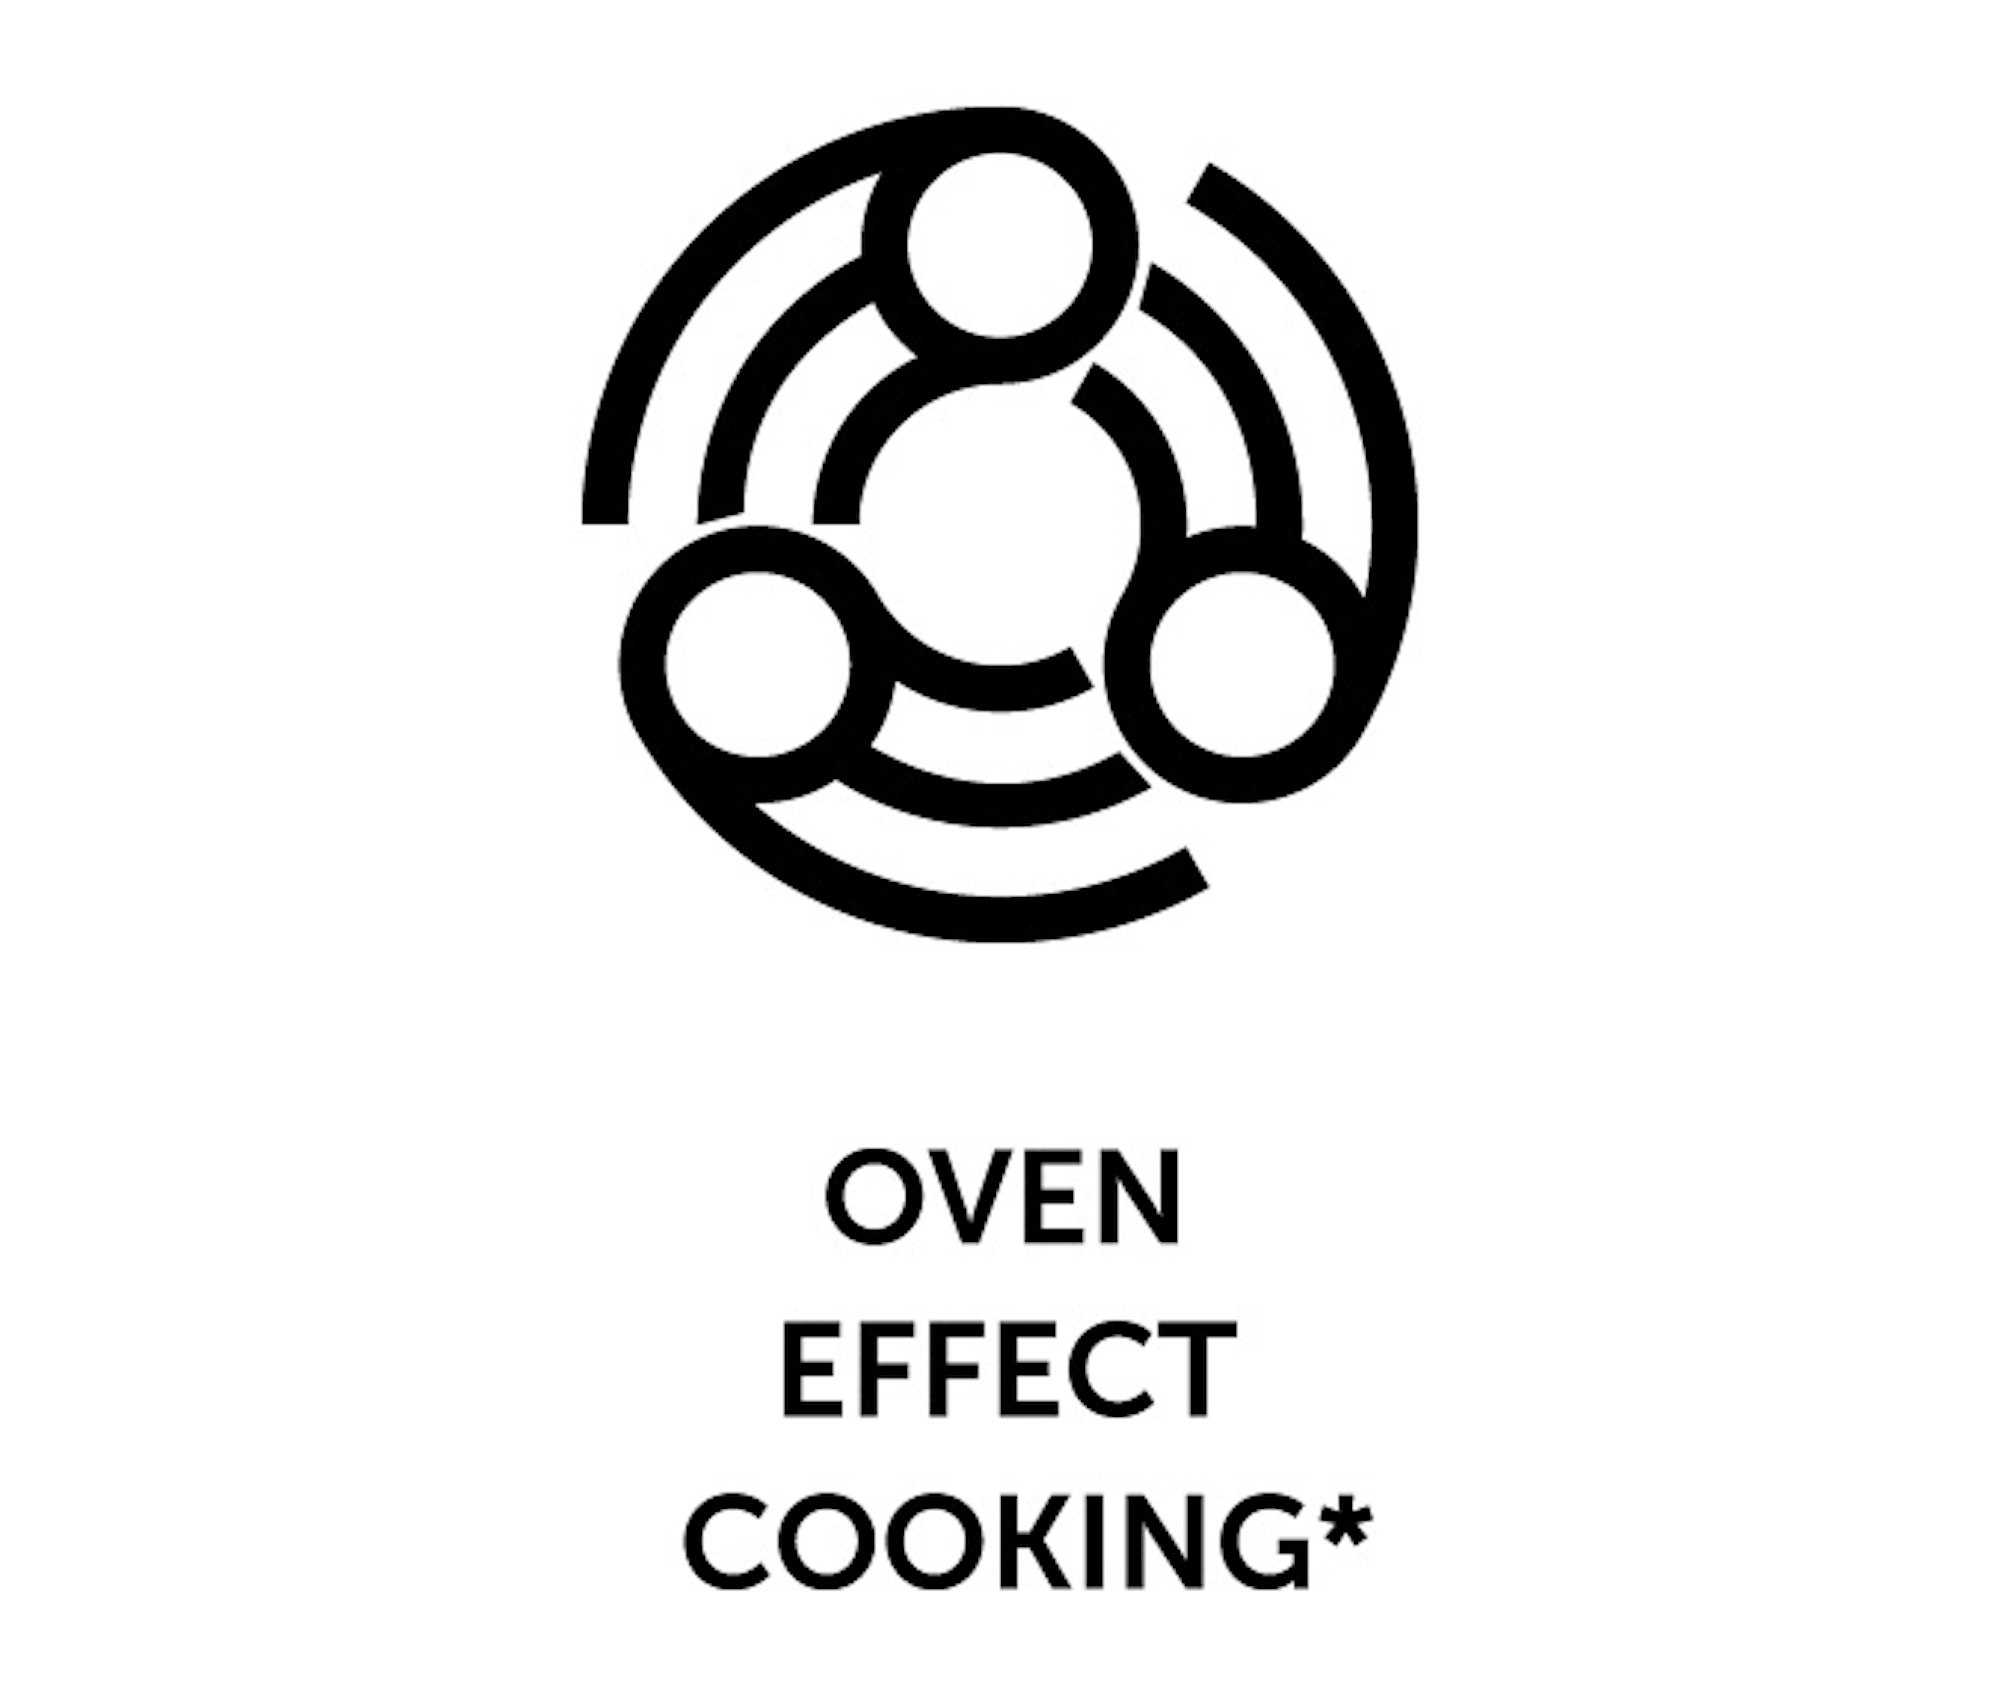 Oven Effect Cooking